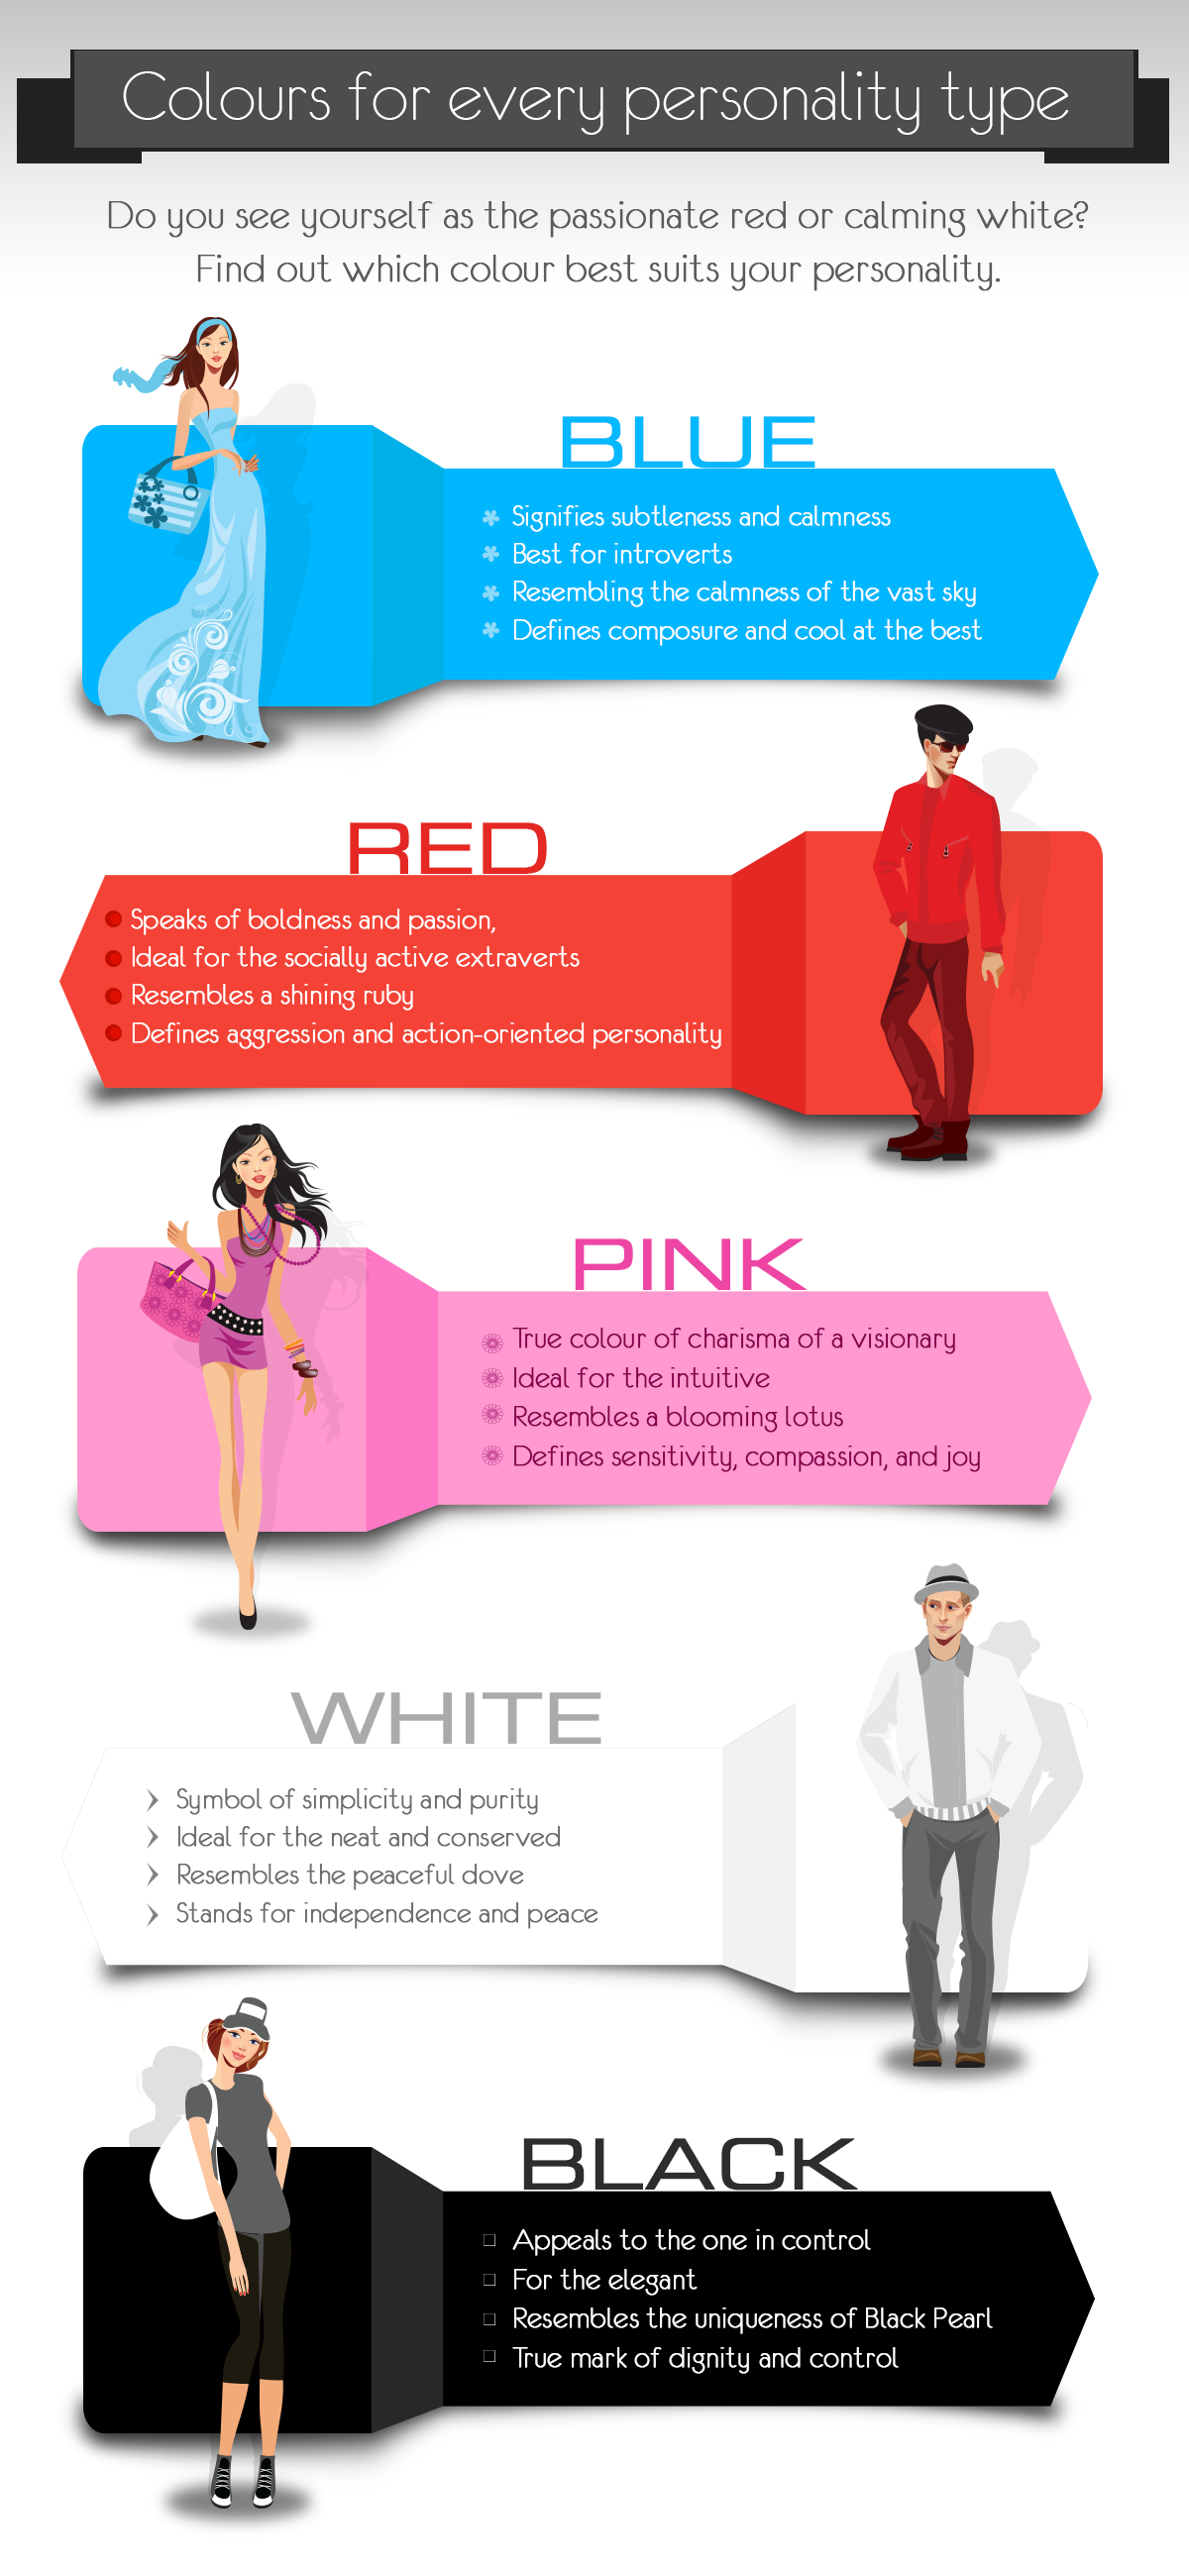 What Does Your Clothing Color Say About Your Personality